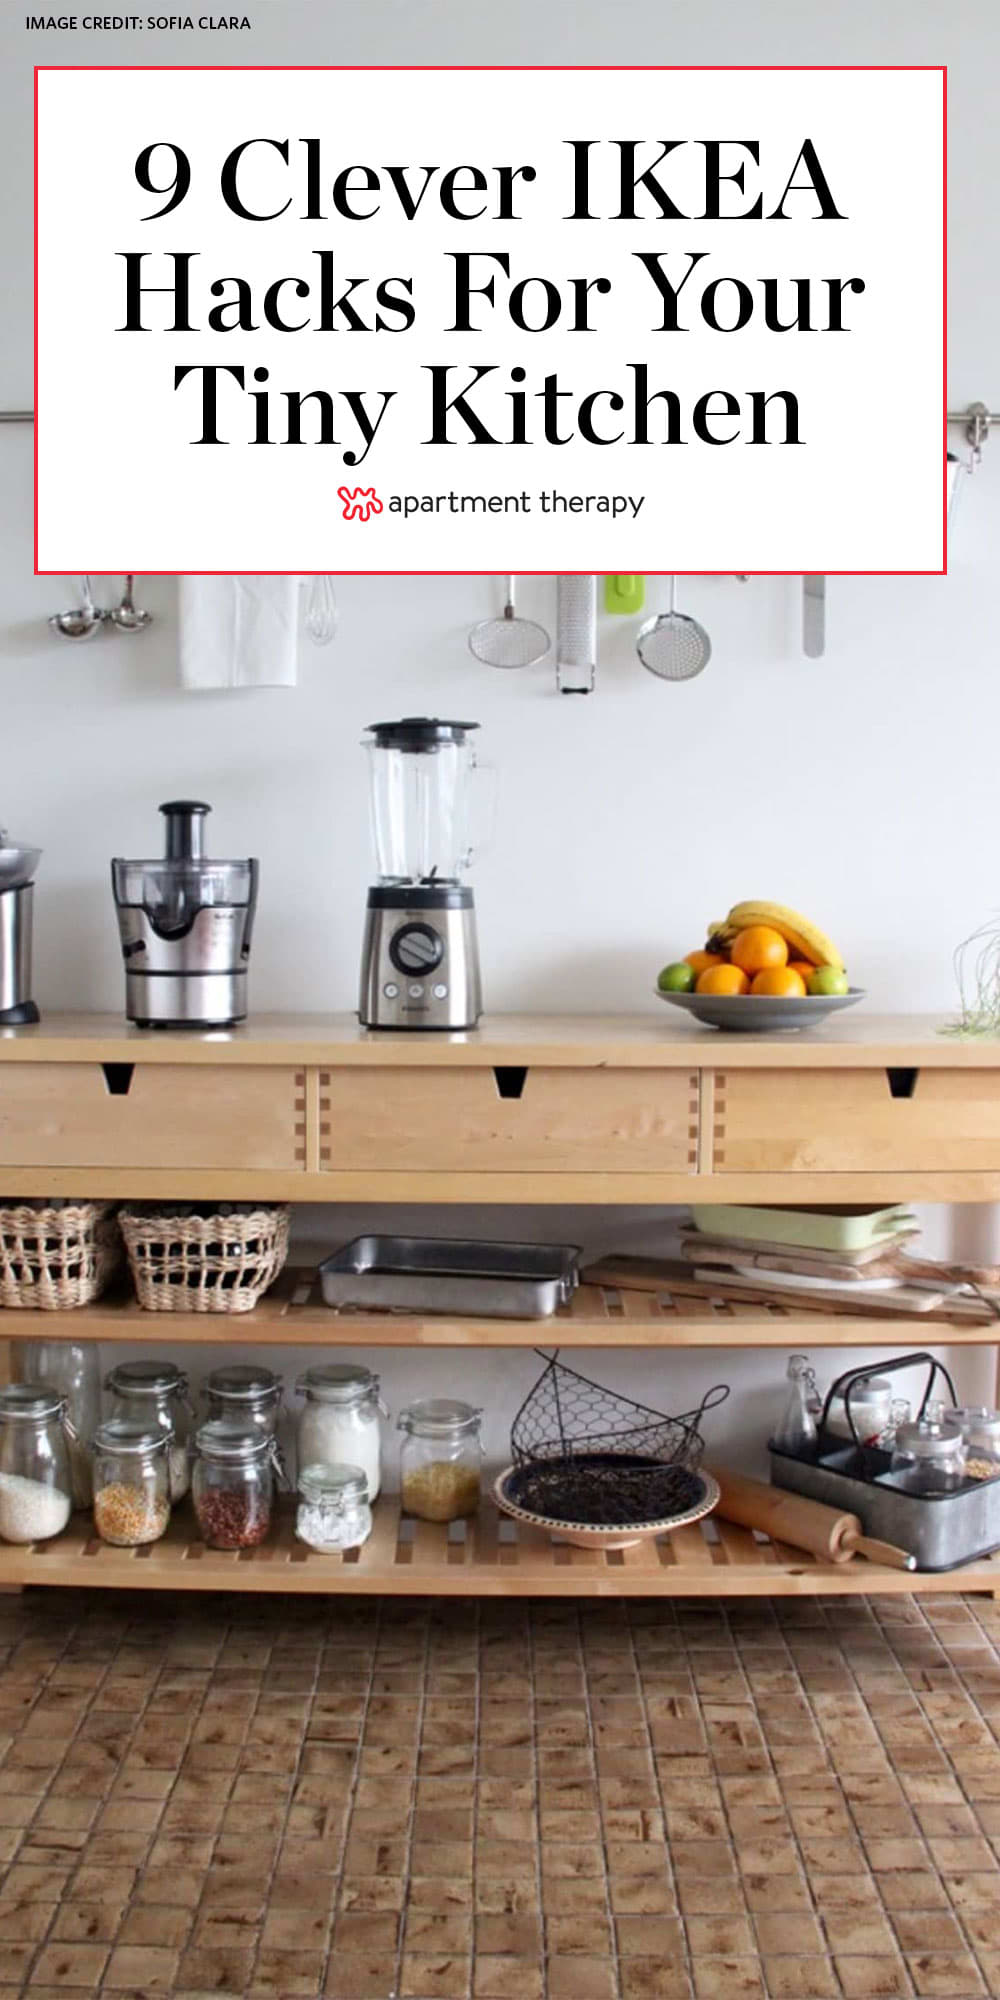 18 IKEA Hacks for Small Kitchens   How to Hack IKEA For Kitchen ...